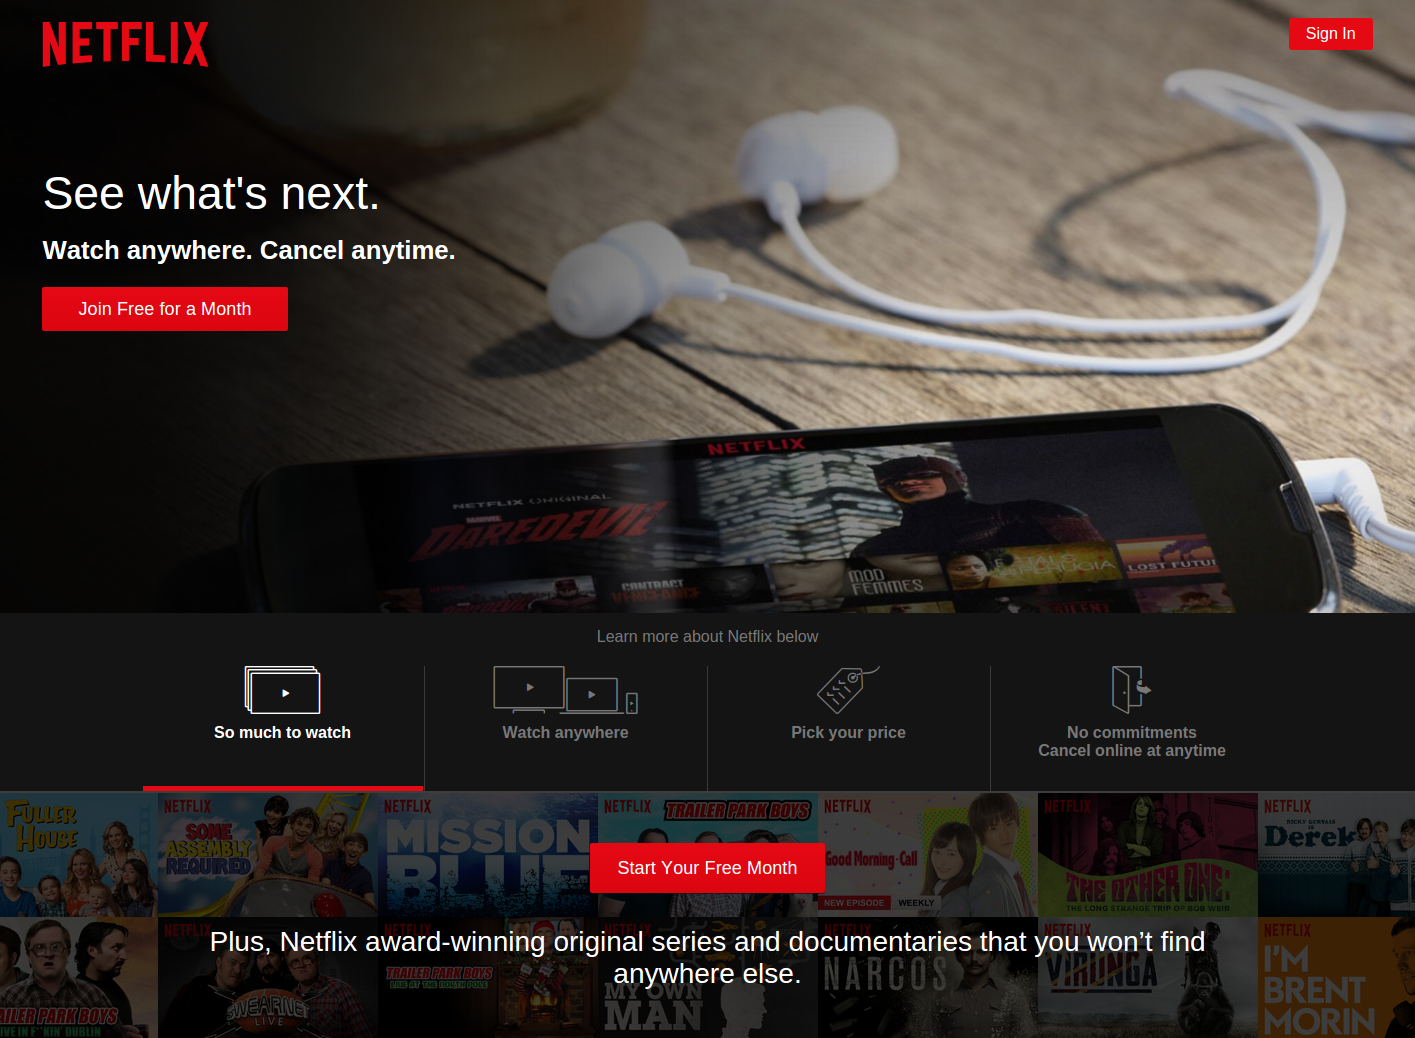 Netflix has solved the problem of watching TV series over the Internet